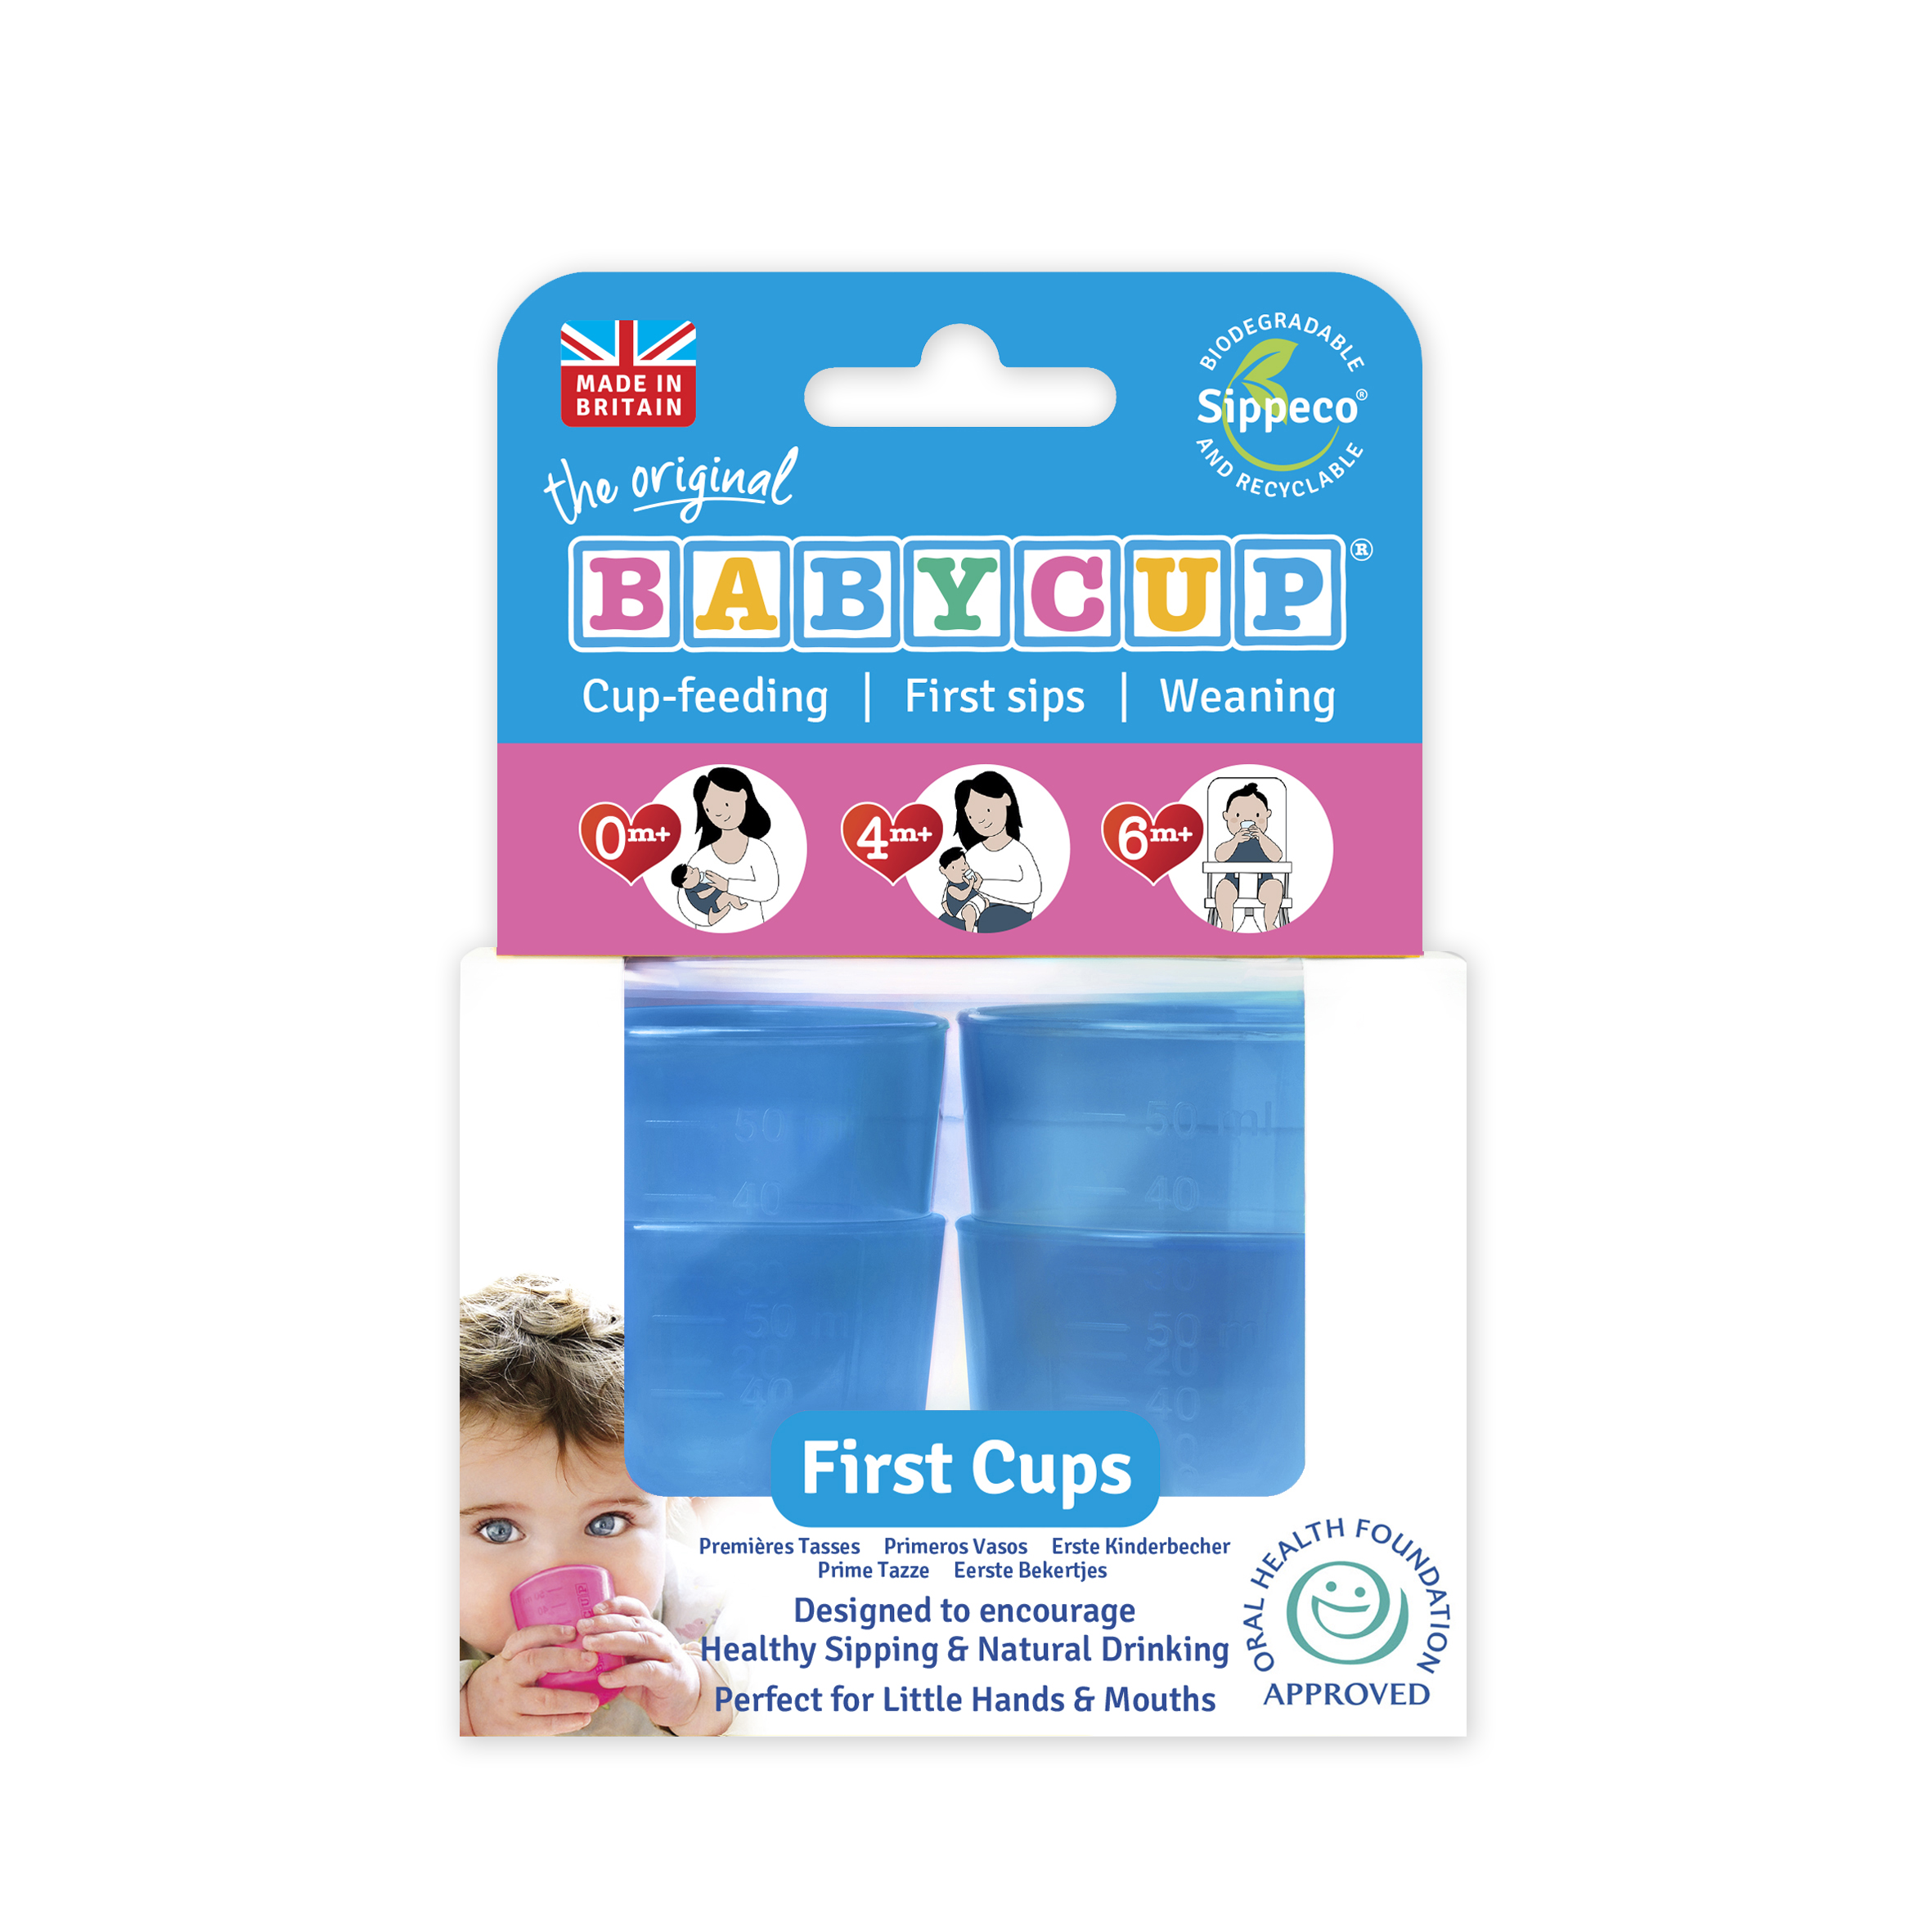 Babycup Sippeco Mini Open Cups - pack of four